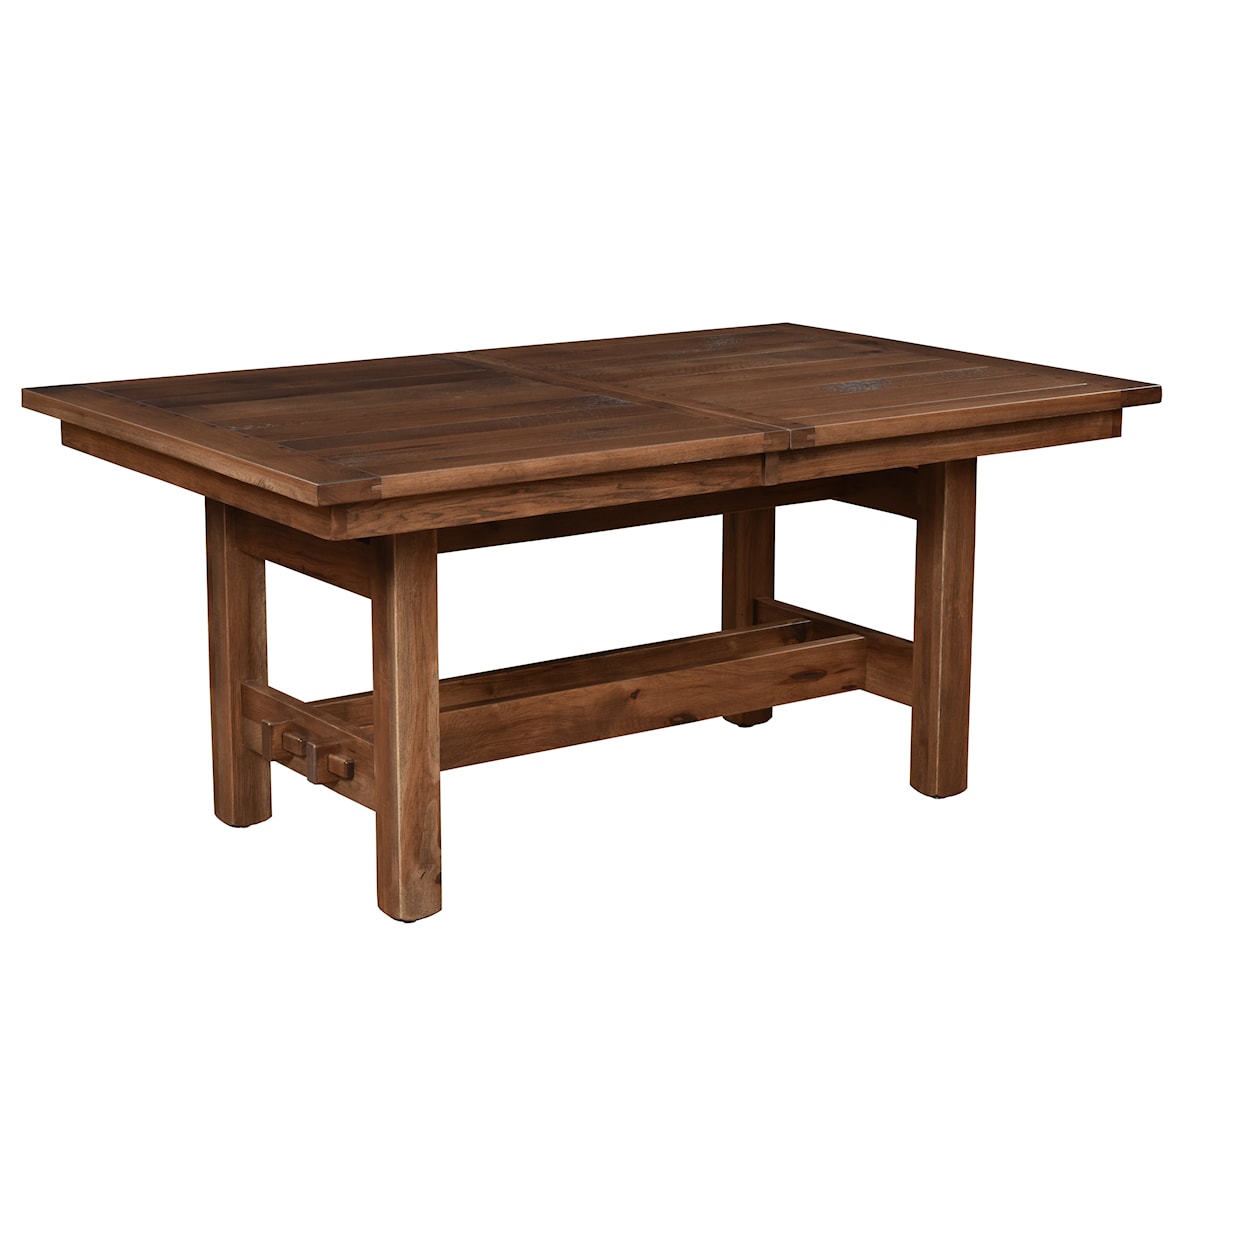 Trailway Amish Wood Sutter Mills Trestle Table